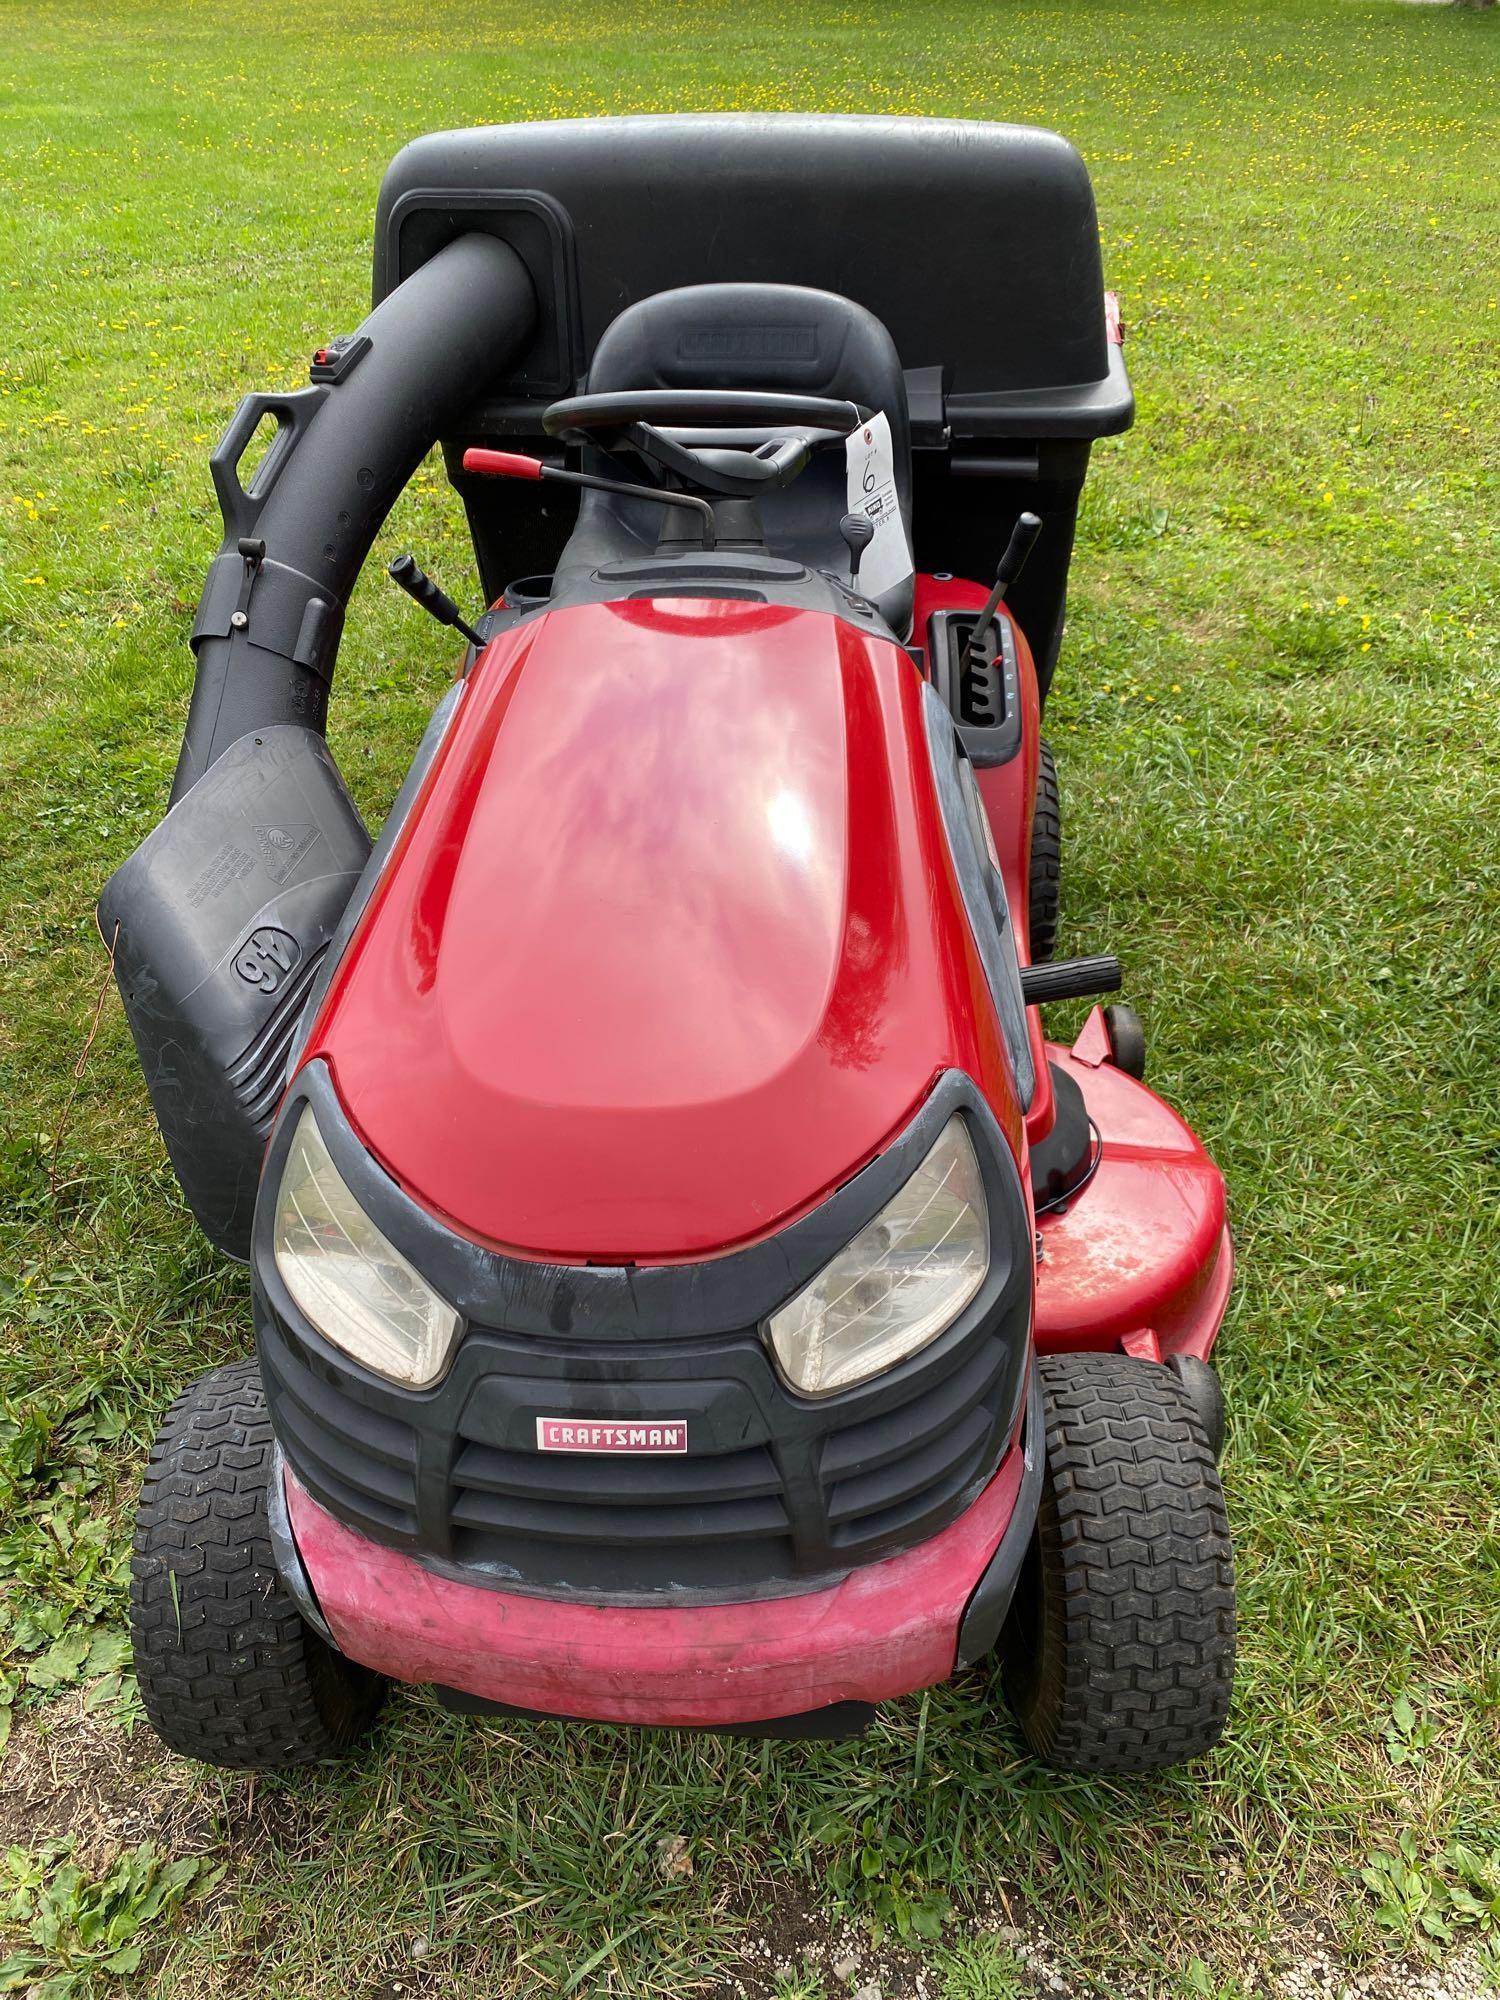 Craftsman YTS3000 Riding mower with bagger